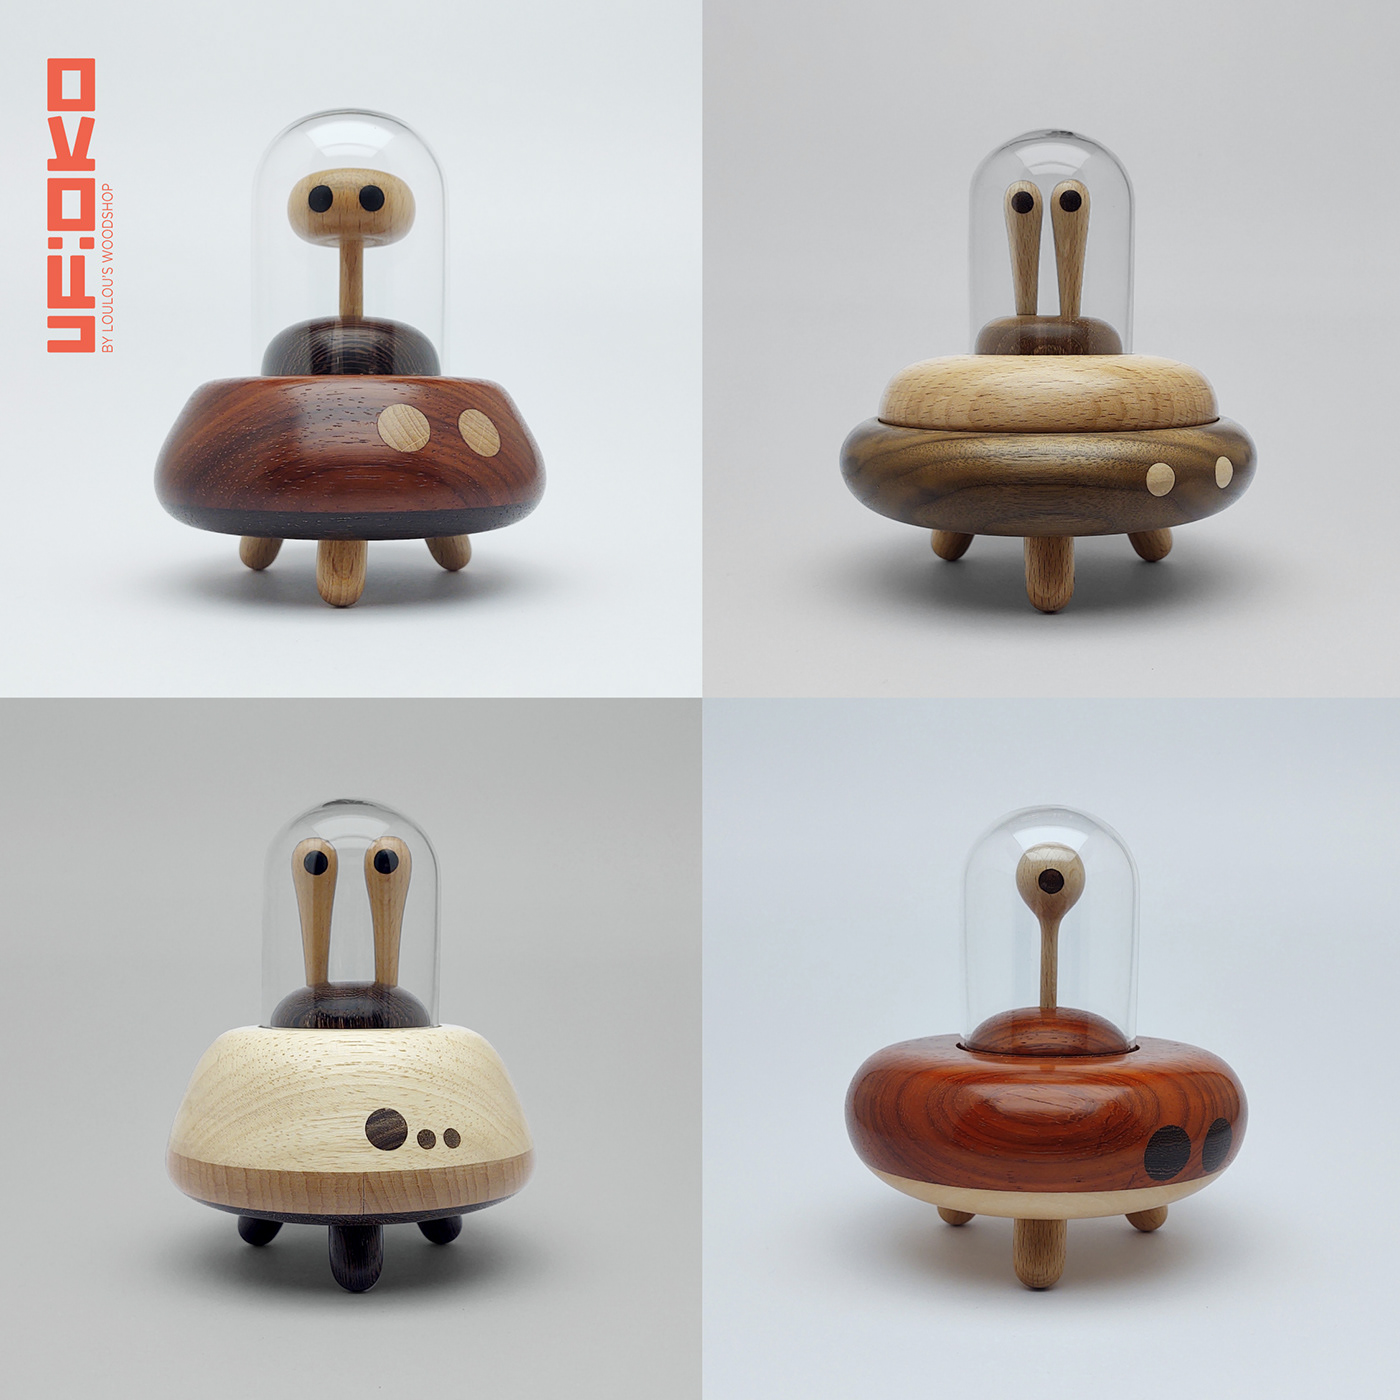 Character design  handmade toy design  UFO wood wood art wooden toy woodworking